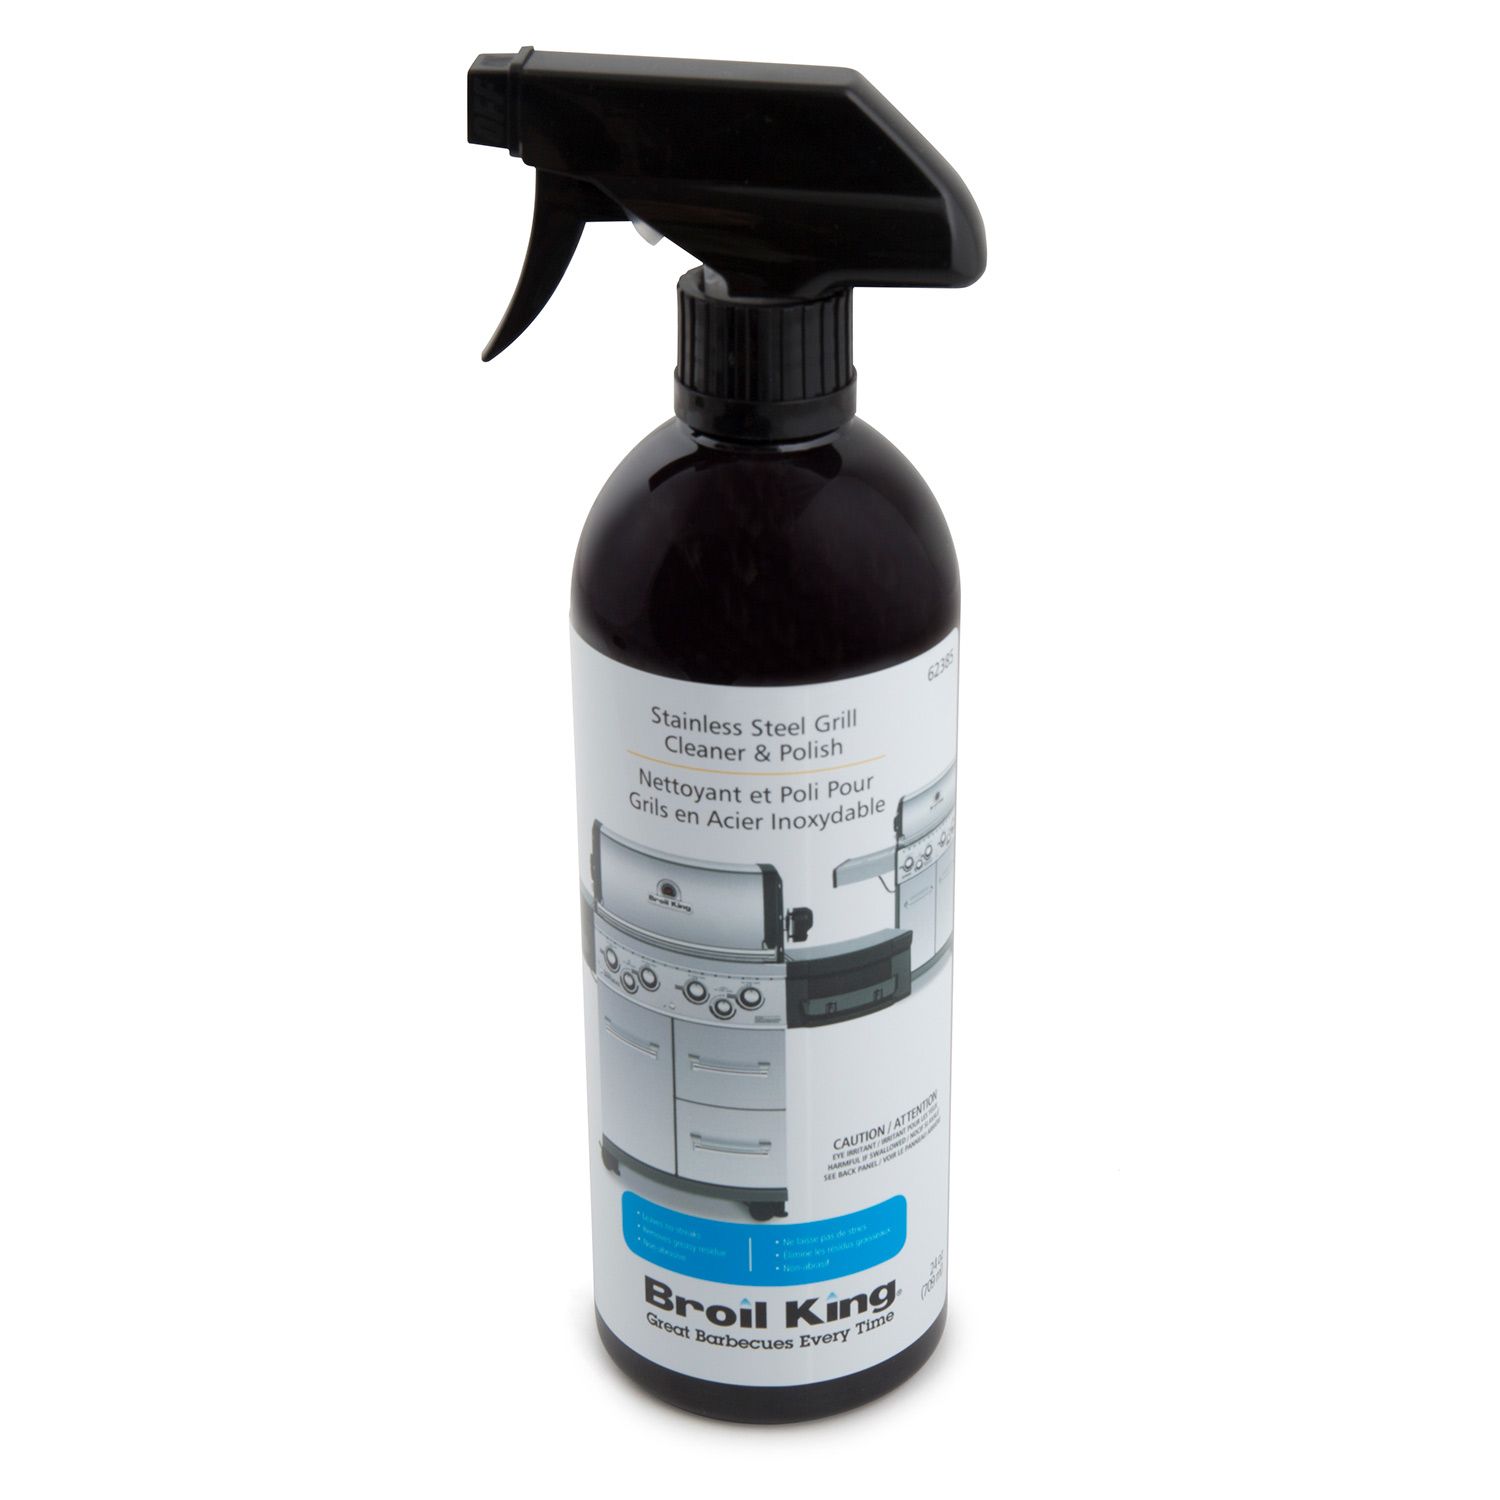 Broil King Stainless Steel Polish Cleaner